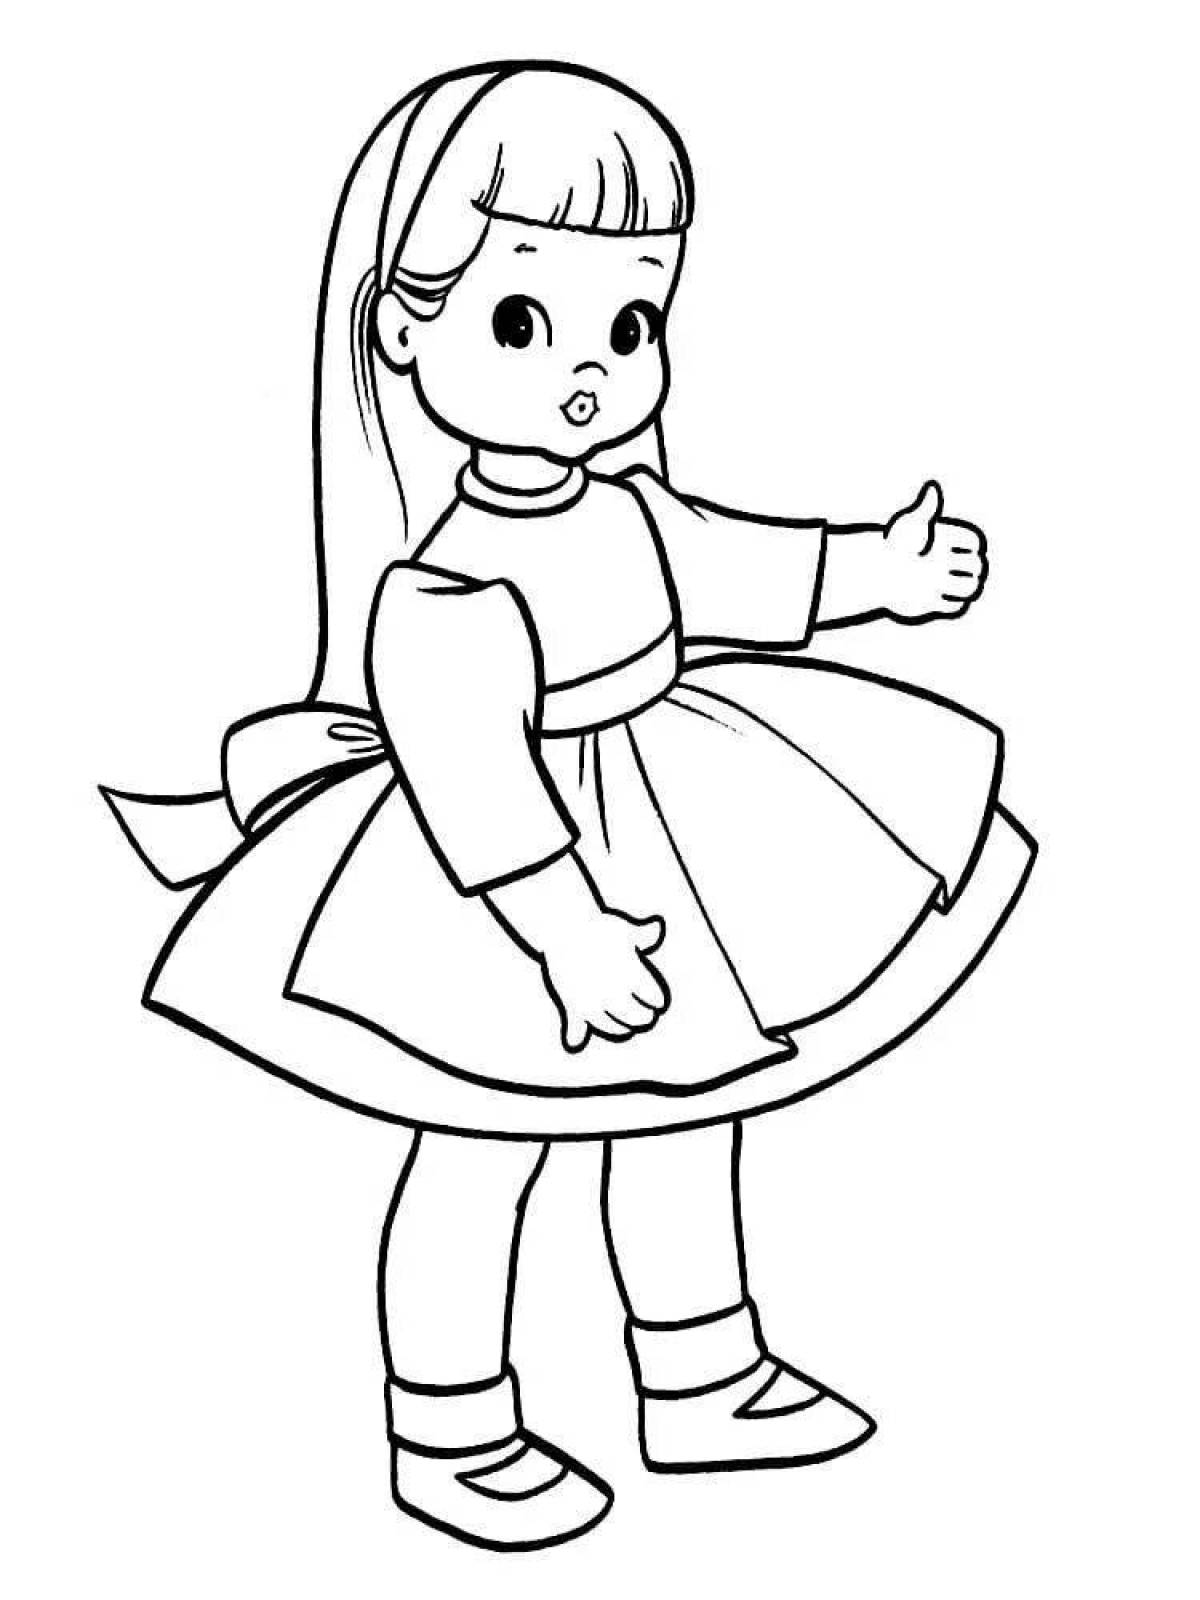 Cute doll coloring book for 3-4 year olds